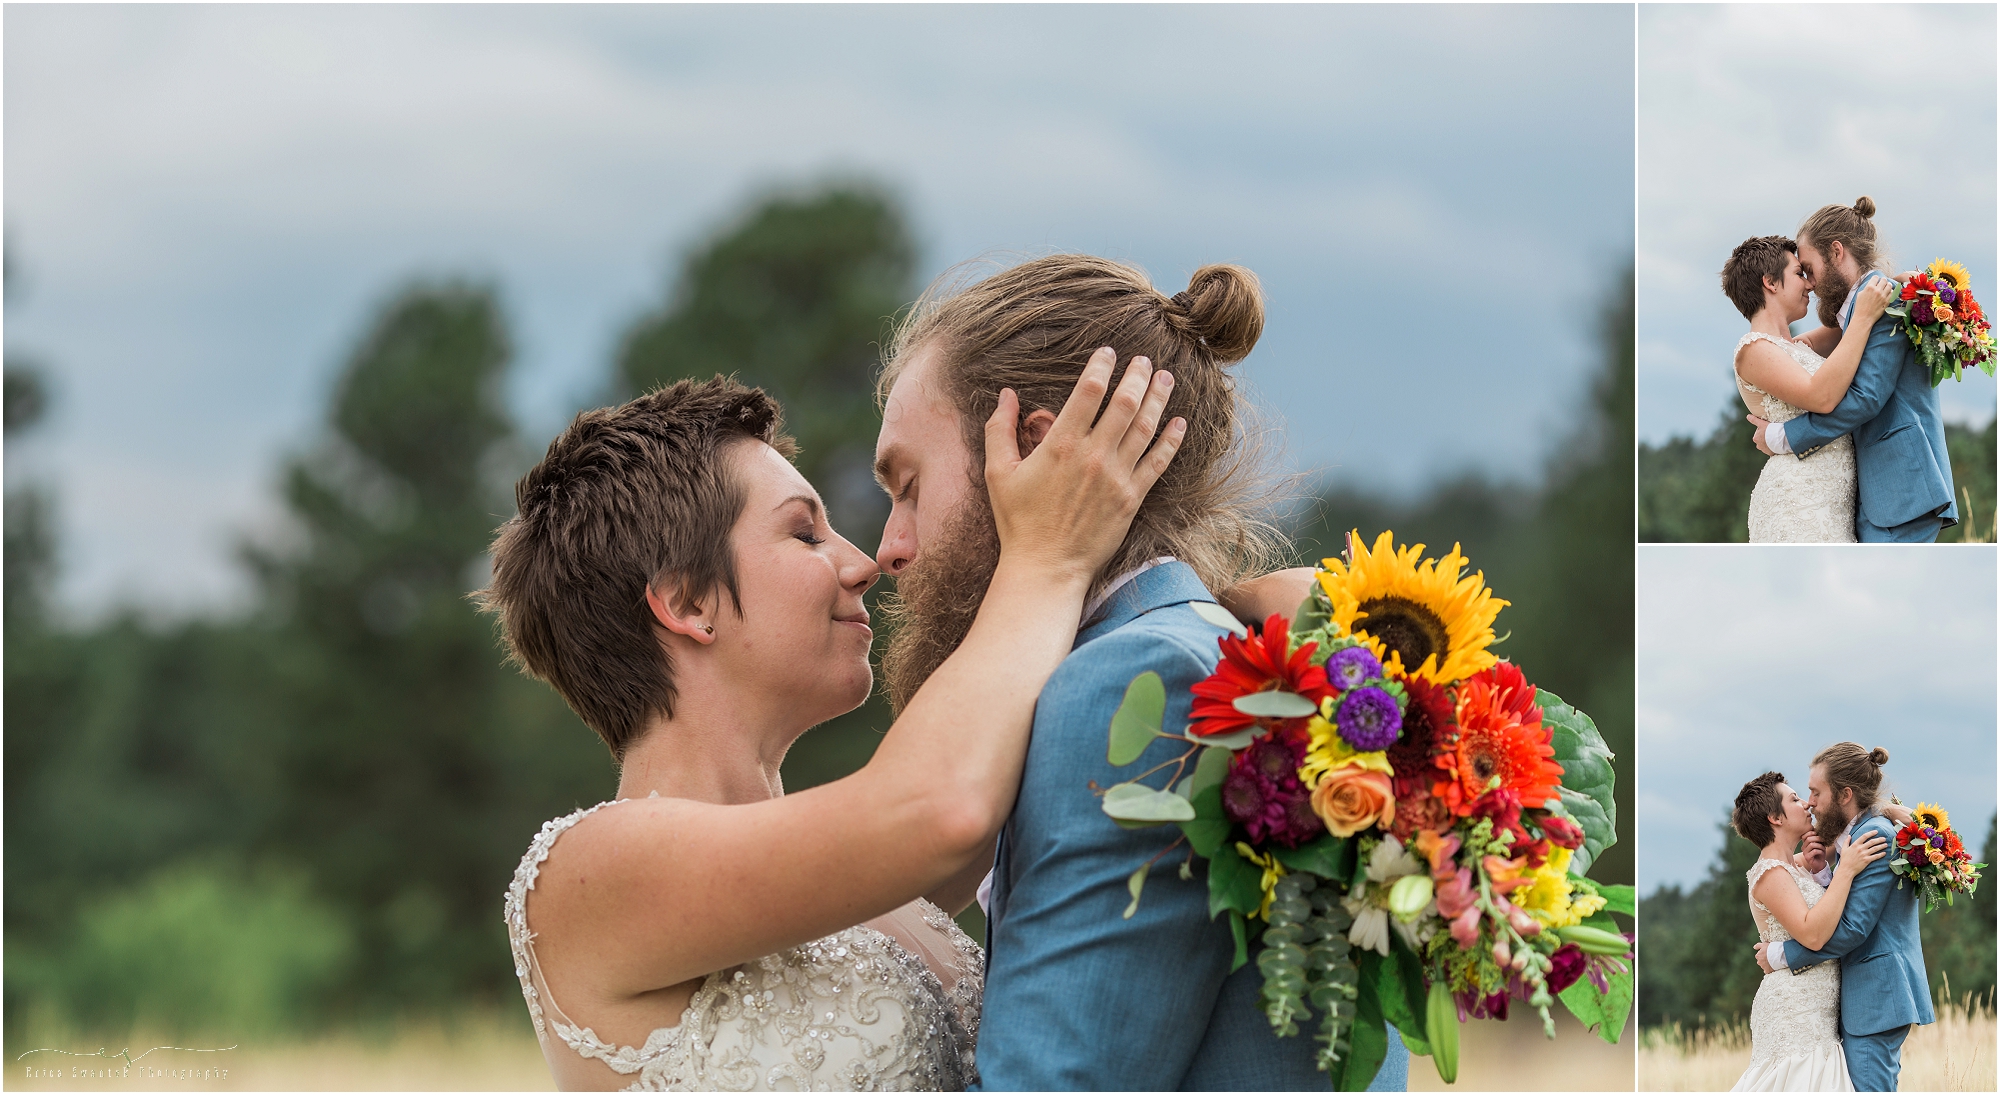 Such a gorgeous free-spirited wedding couple! 